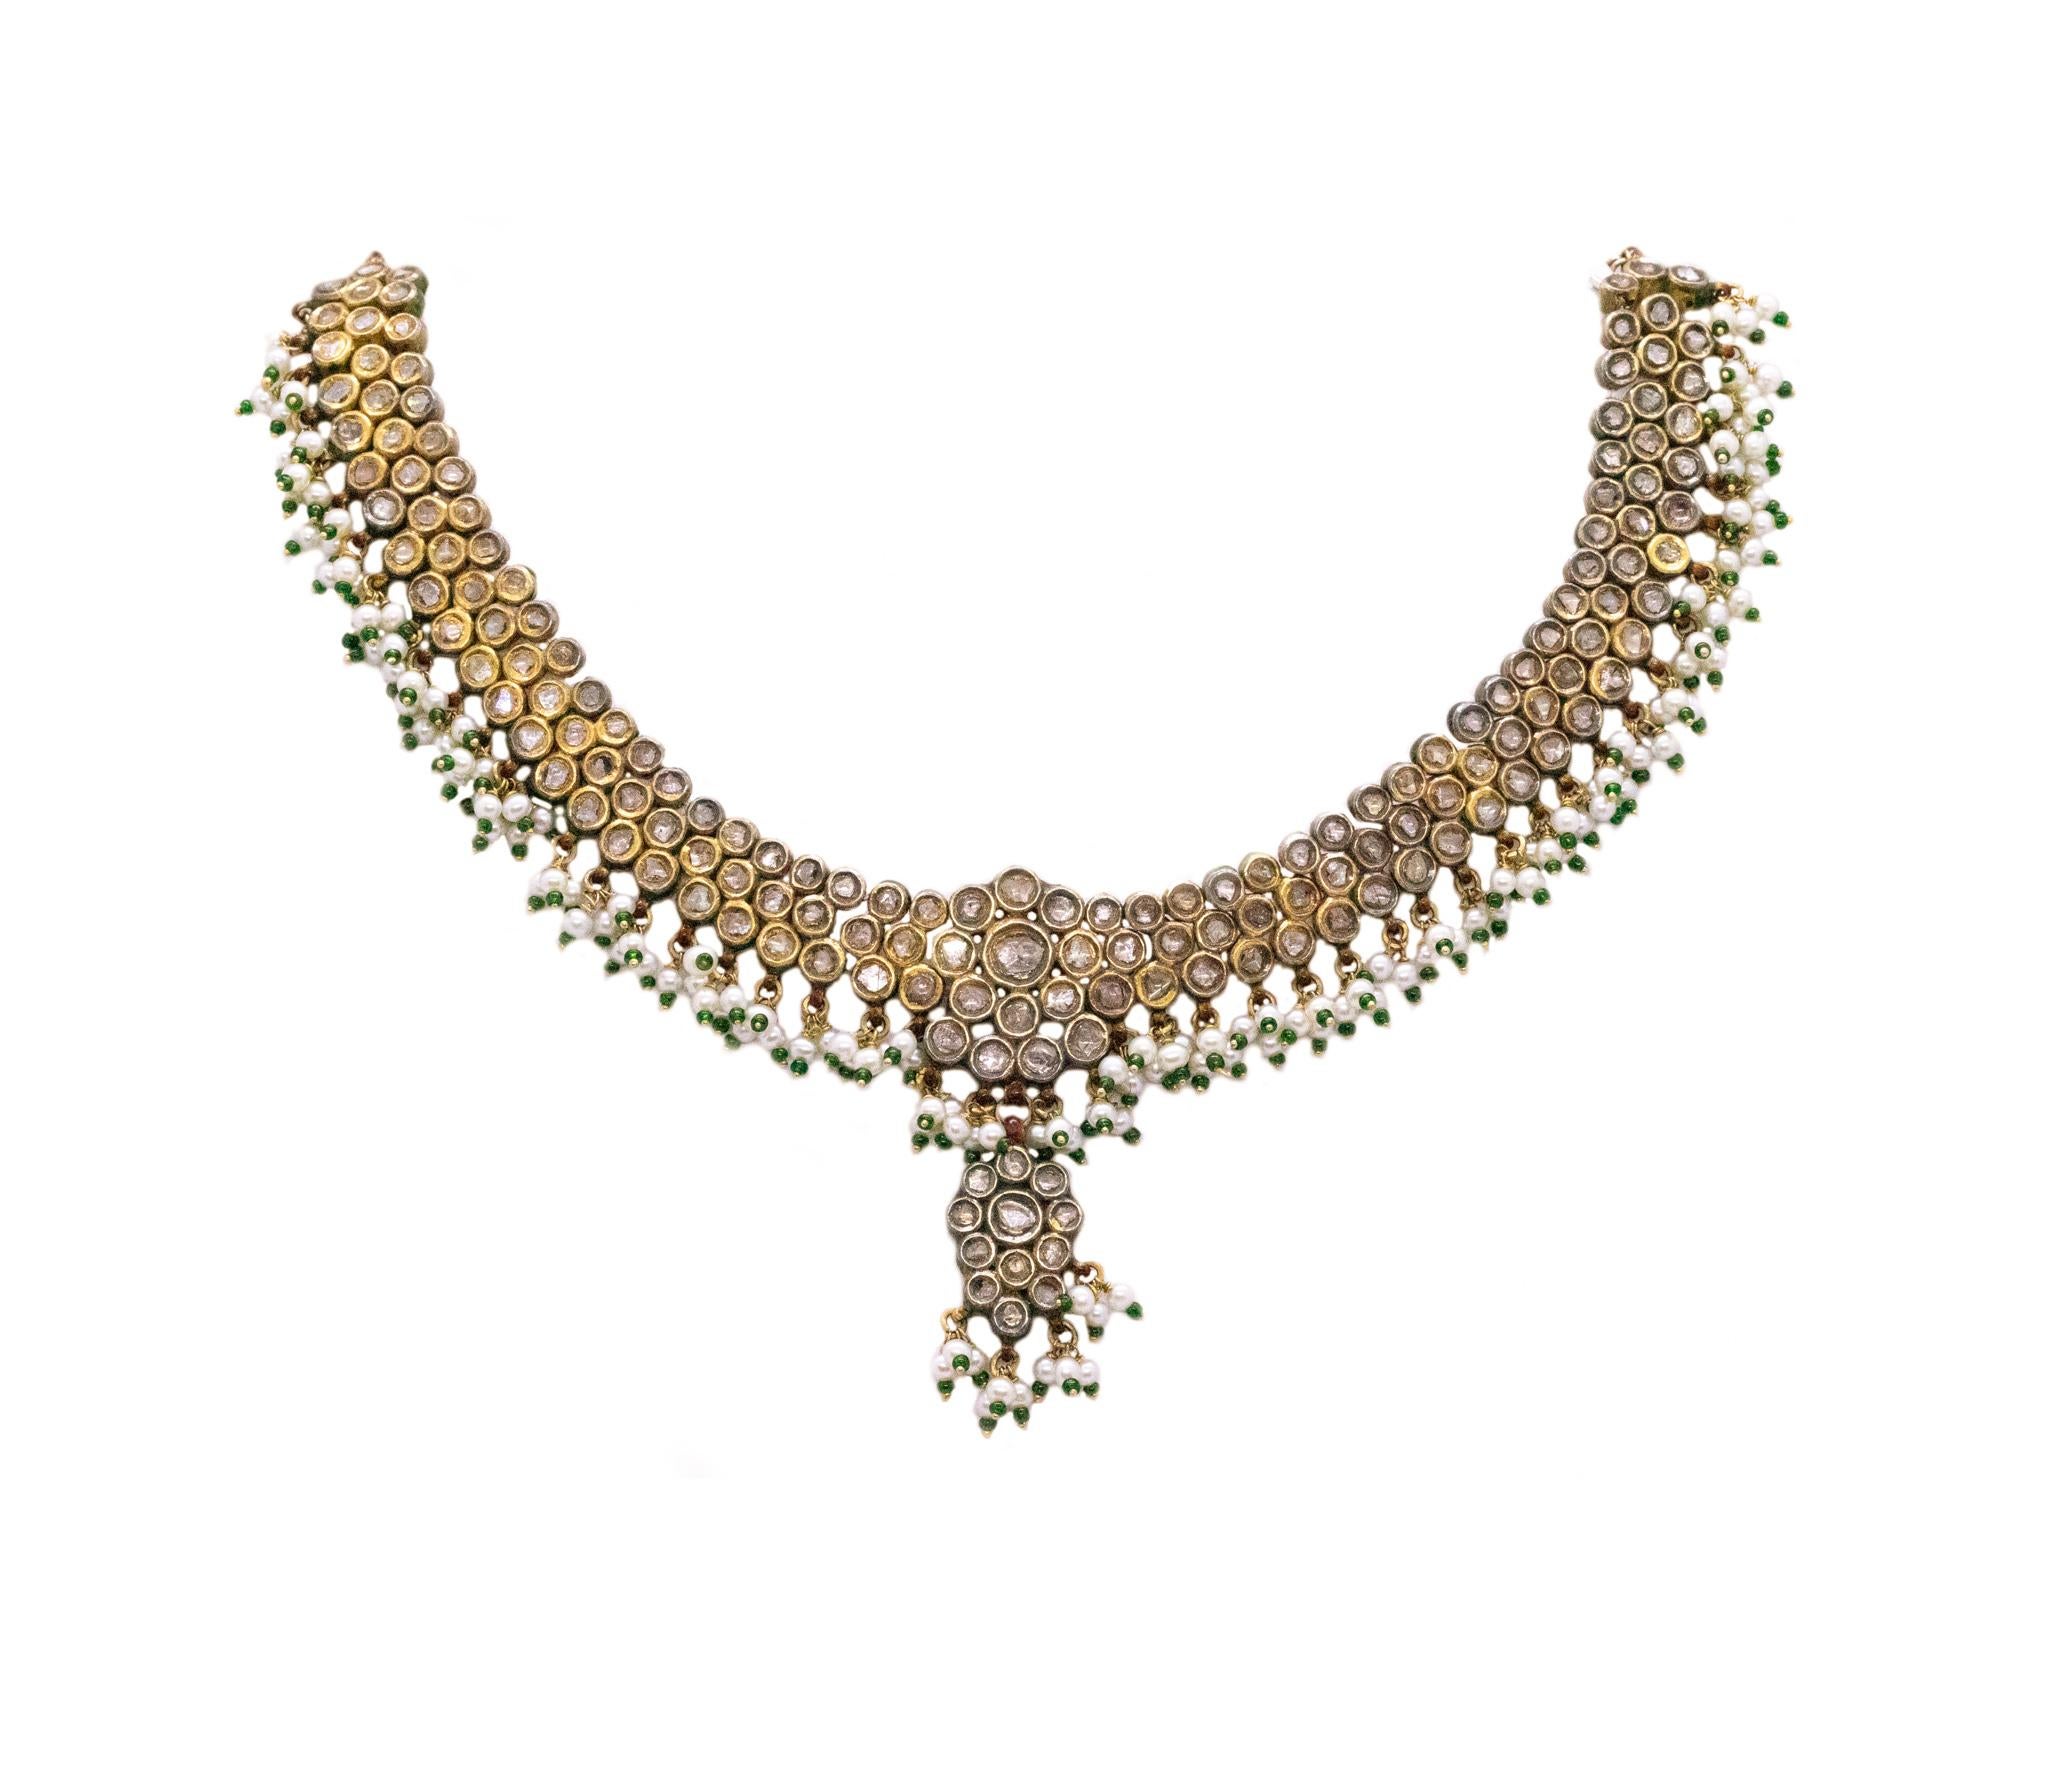 Stunning Mughal Court jeweled necklace.

Designed in India around the 1940's in the old Mughal jewelry style. This type of pieces are commonly used in Indian wedding festivities and was crafted in solid 21 karats (0.9166) of yellow gold. decorated